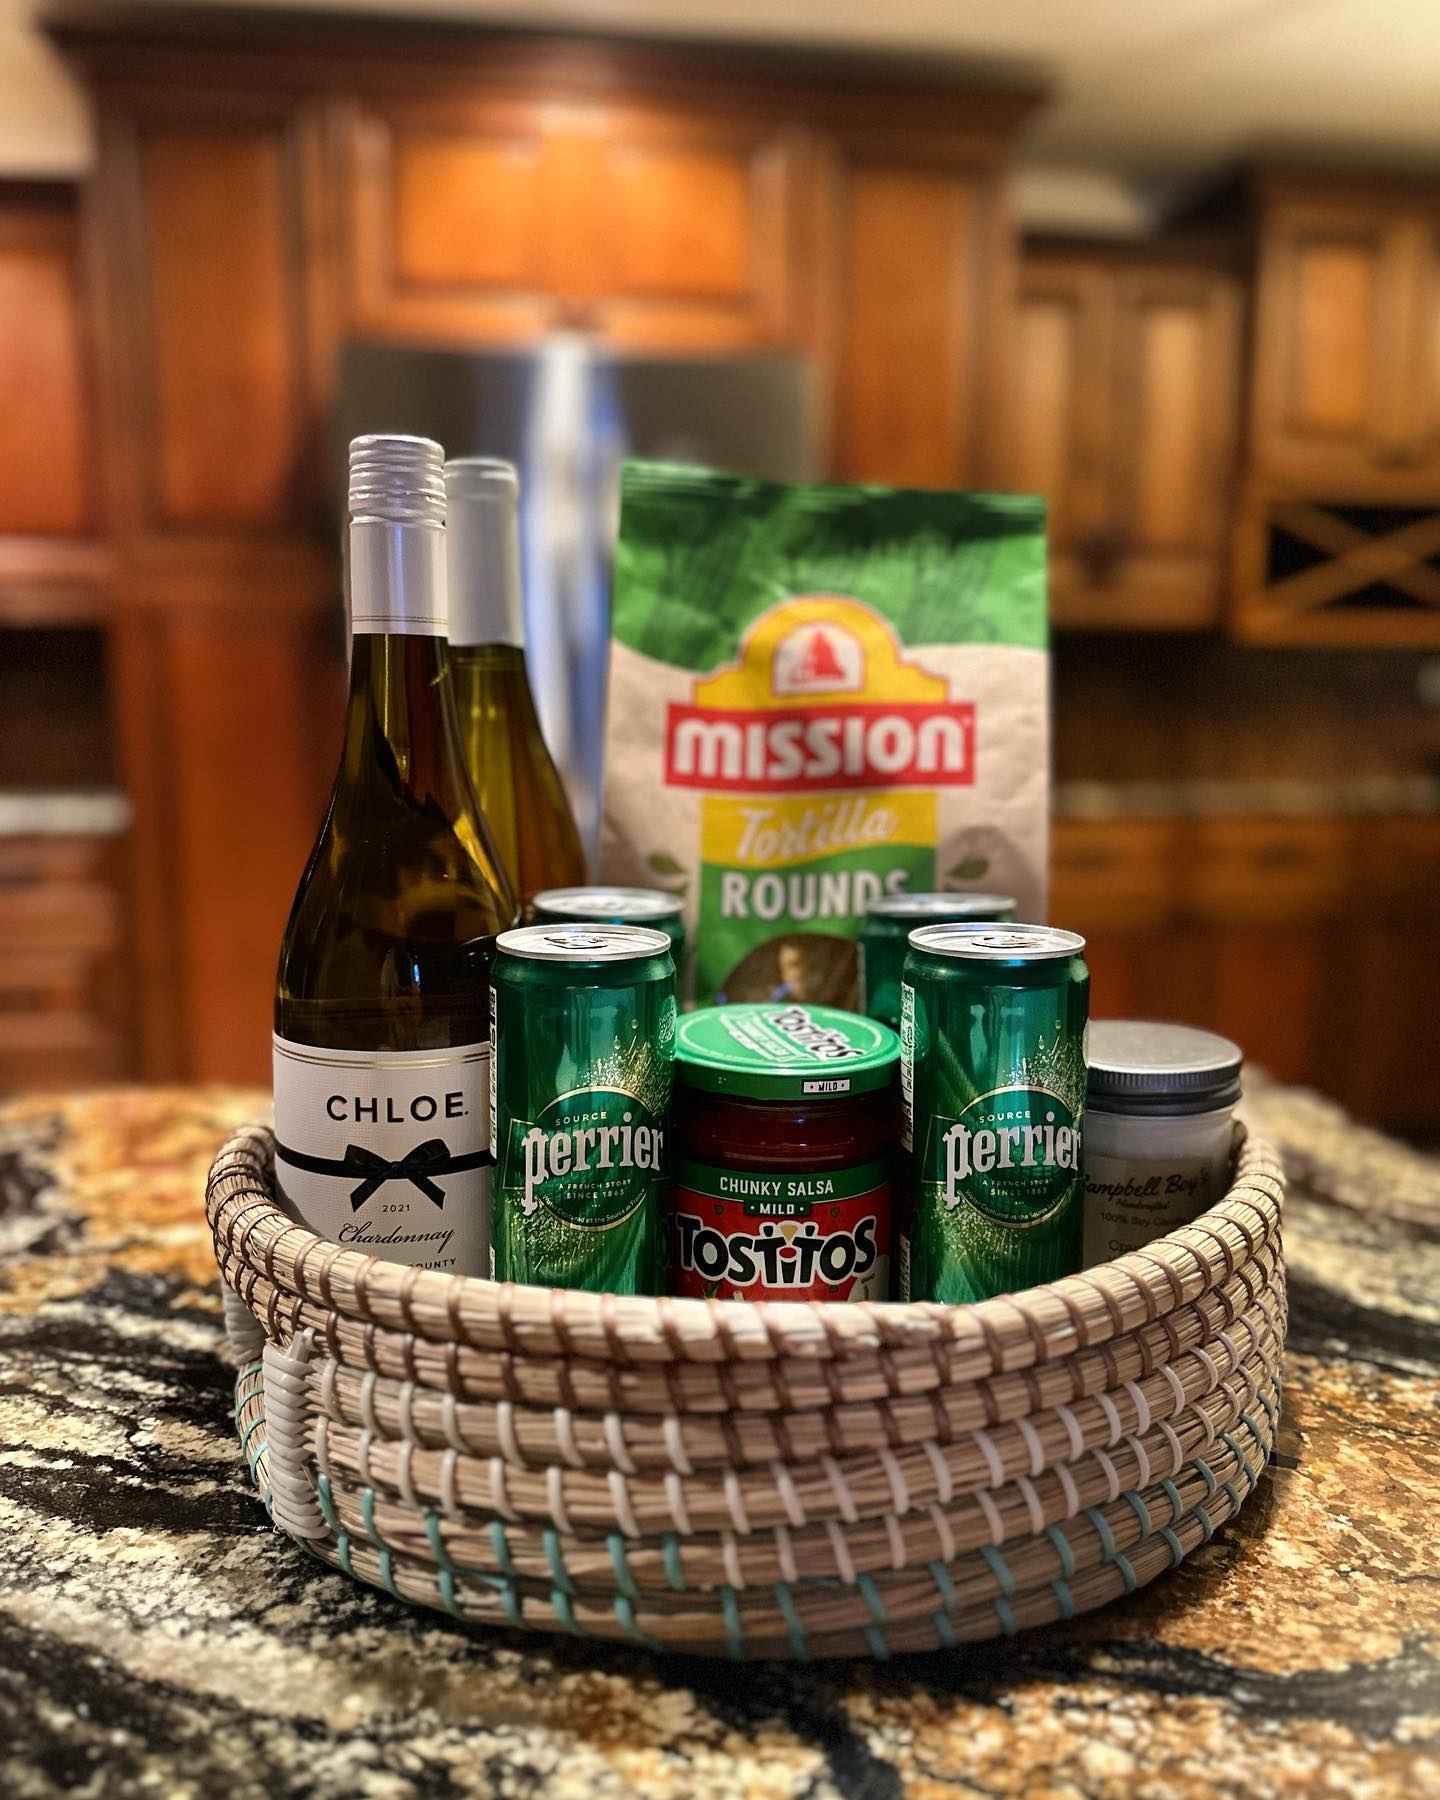 Part of our 5⭐️ experience is the personalized gift basket our guests receive upon arrival. 🧺 

We understand you are of